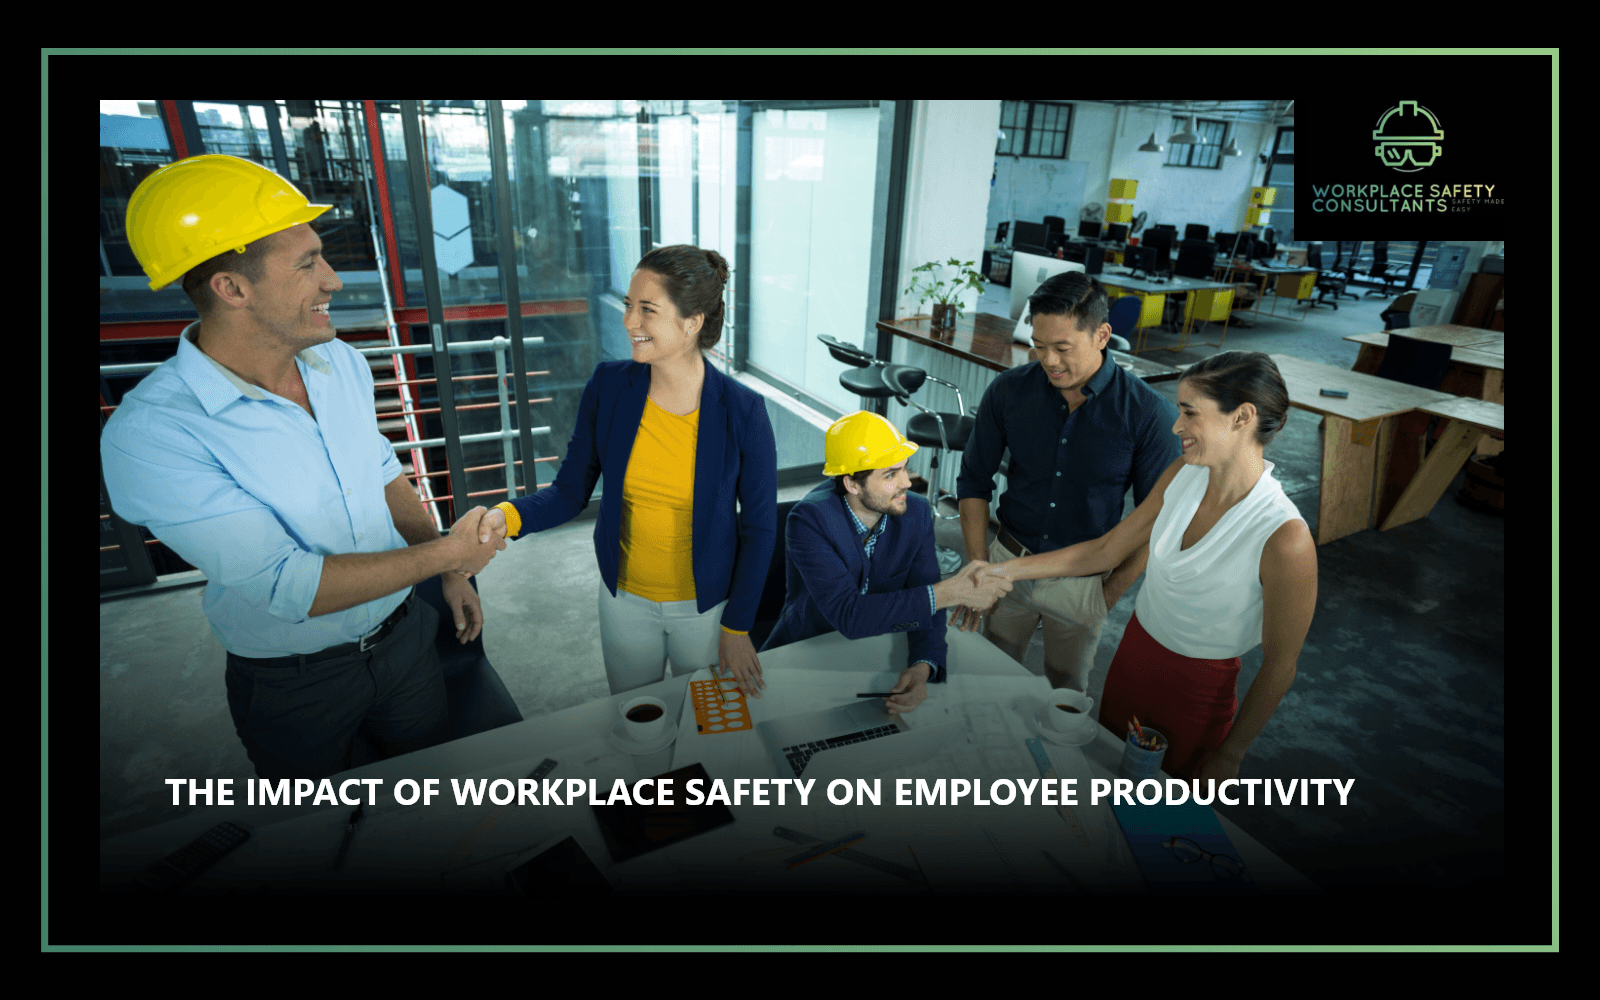 The Impact of Workplace Safety on Employee Productivity - Workplace Safety Consultants